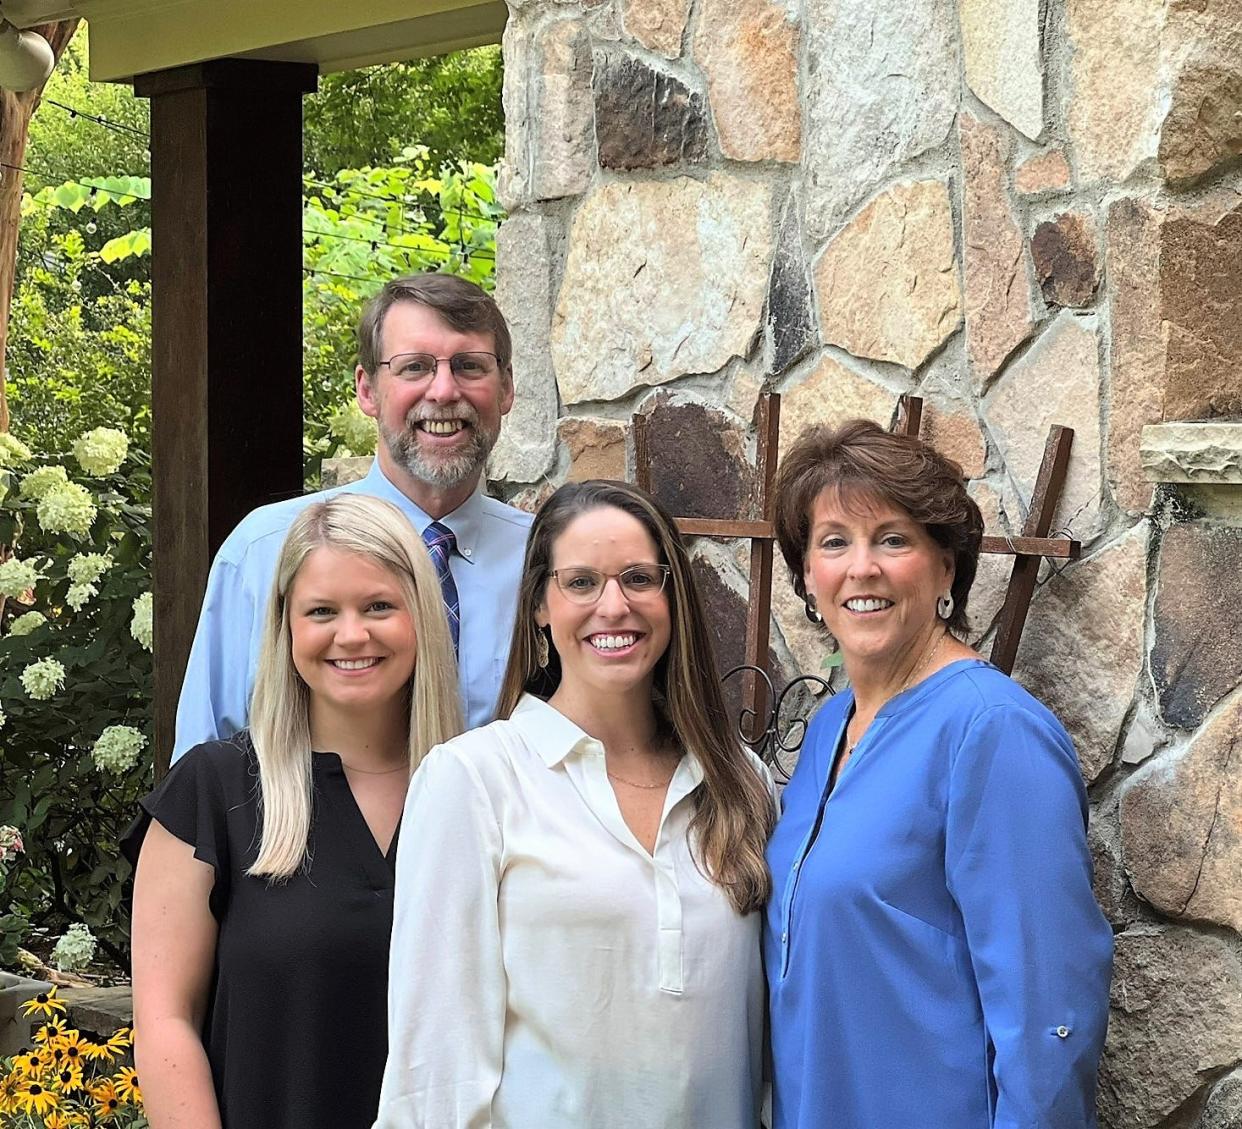 (From left) Dr. Haleigh Bass, Dr. Doug Stover, Dr. Jenna Stover, and Dr. Susan Stover.